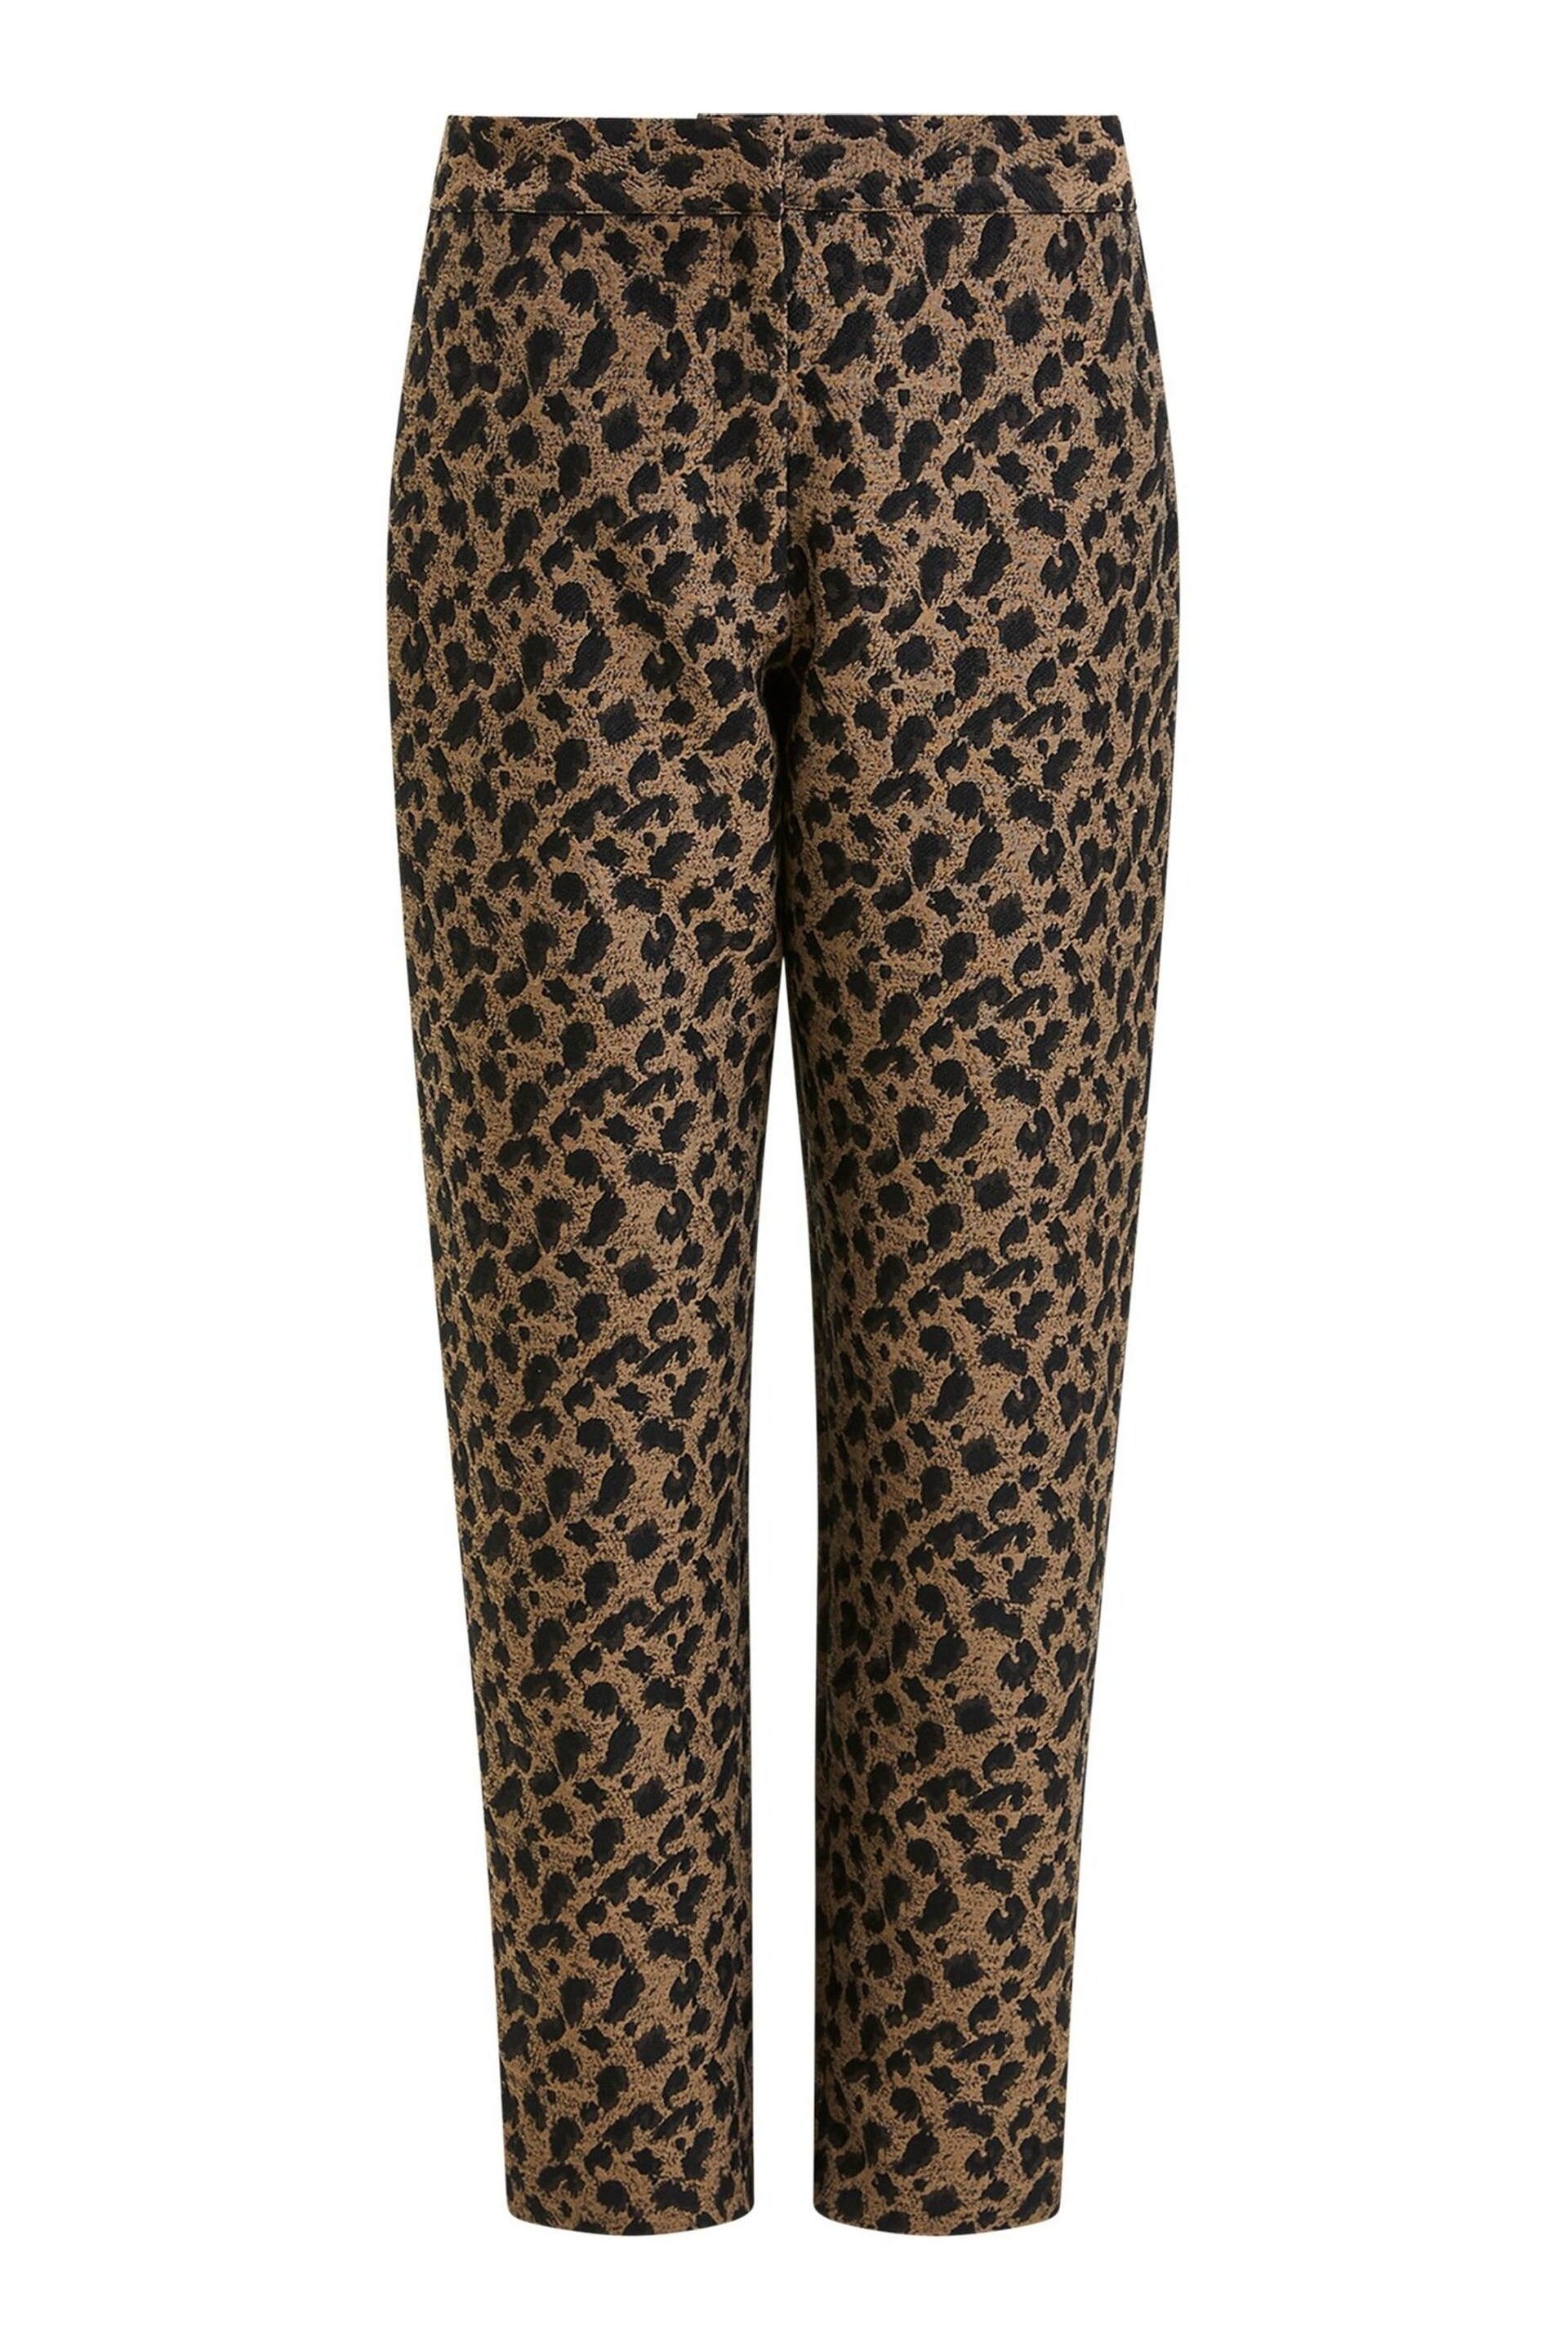 French Connection Estella Jacquard Trousers - Image 4 of 4